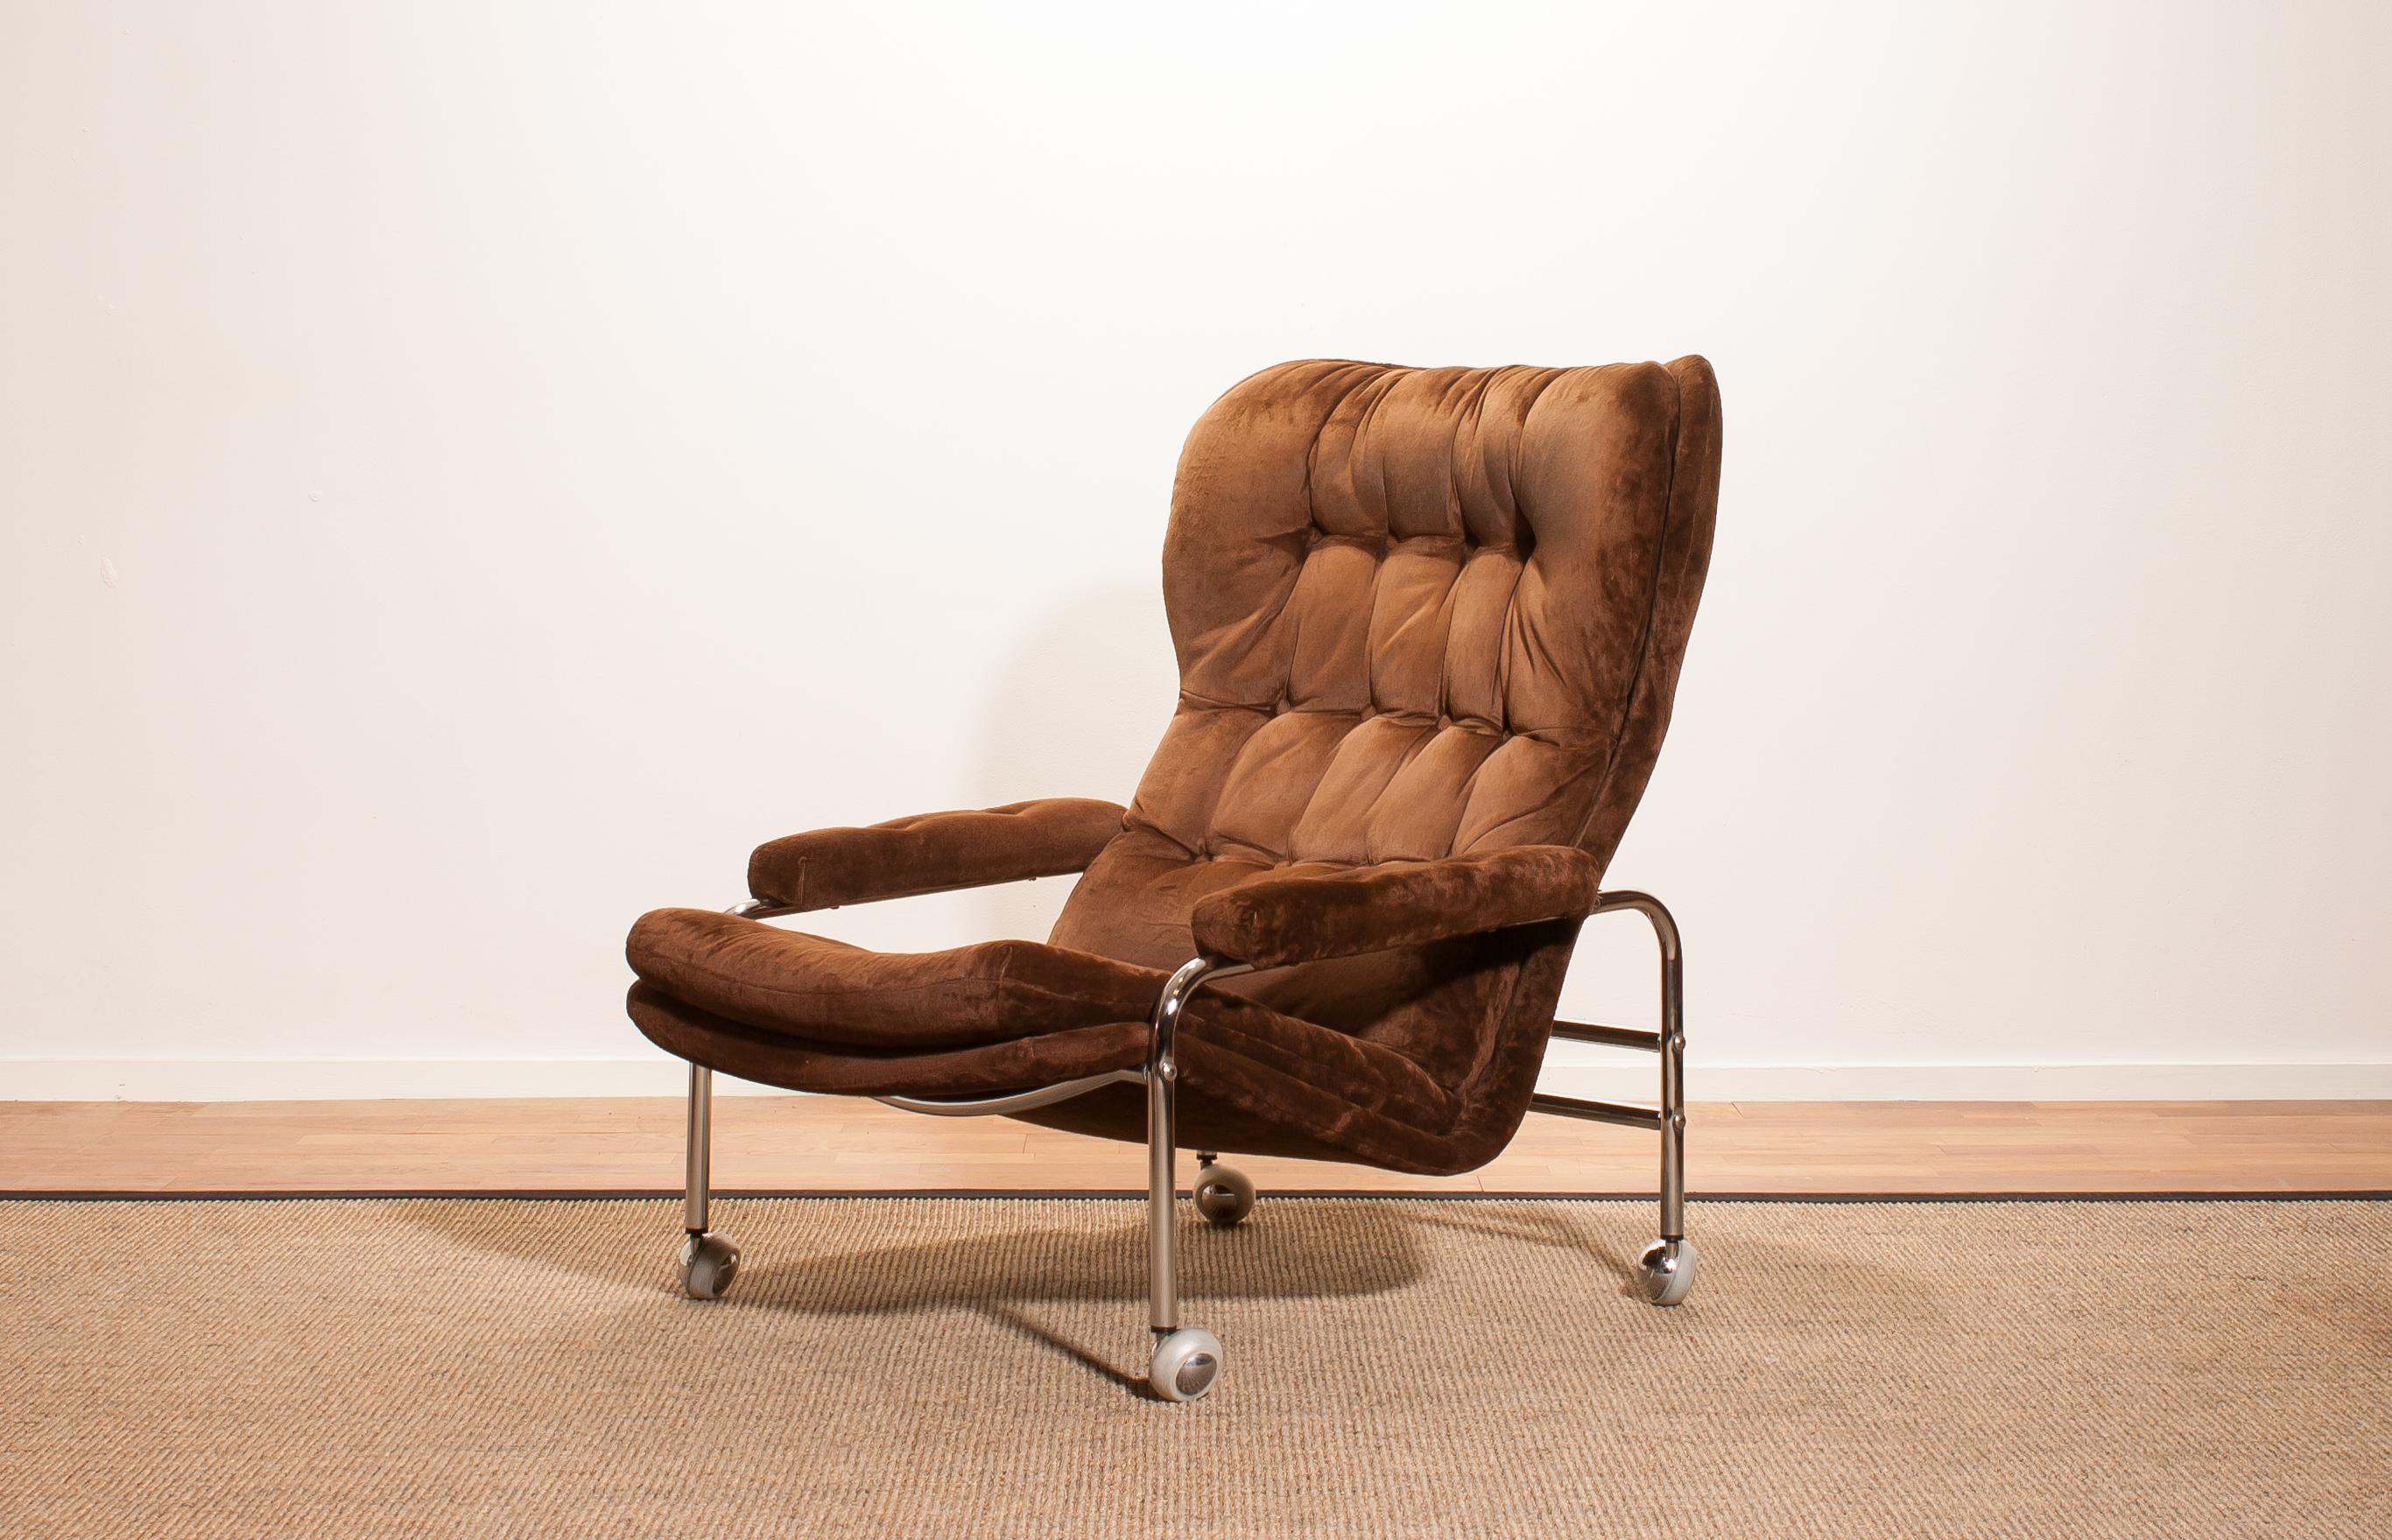 Beautiful lounge chair made by Scapa Rydaholm Sweden.
This chair has a brown velours seating on a chromed wheeled frame.
It is in a very nice used condition with little bold spots in the fabric.
Period 1970s
Dimensions: H.88 cm x W.73 cm x D.104